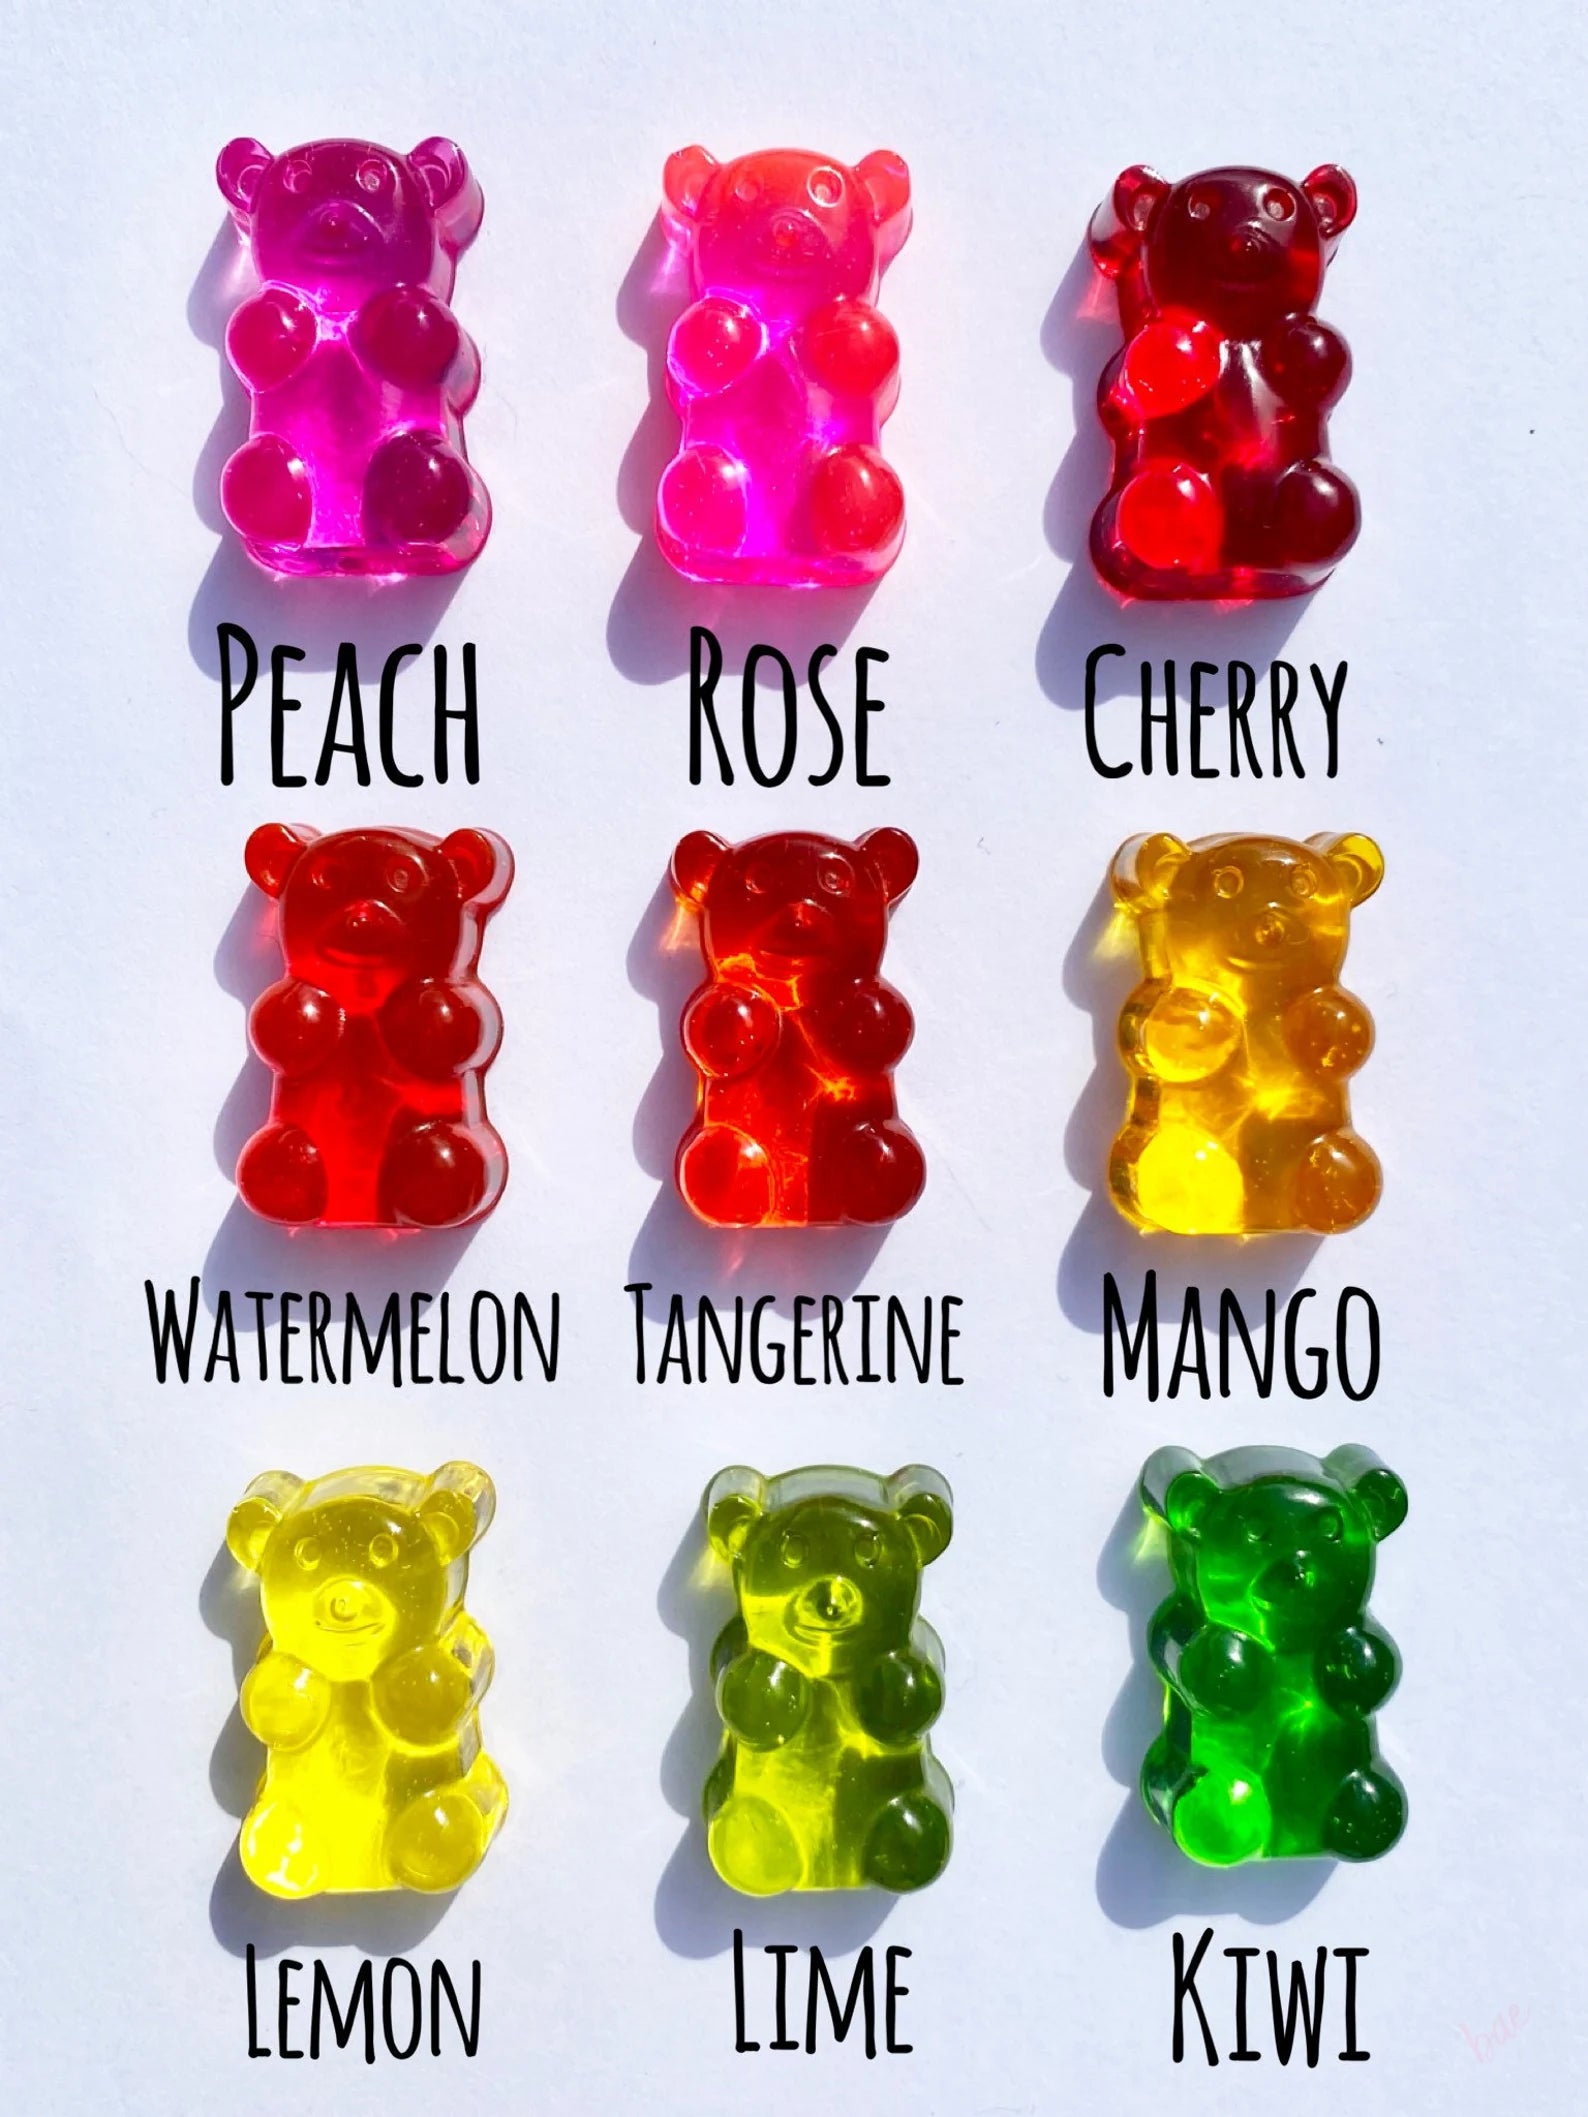 Cool Keychains: Jelly Bears Key Chains